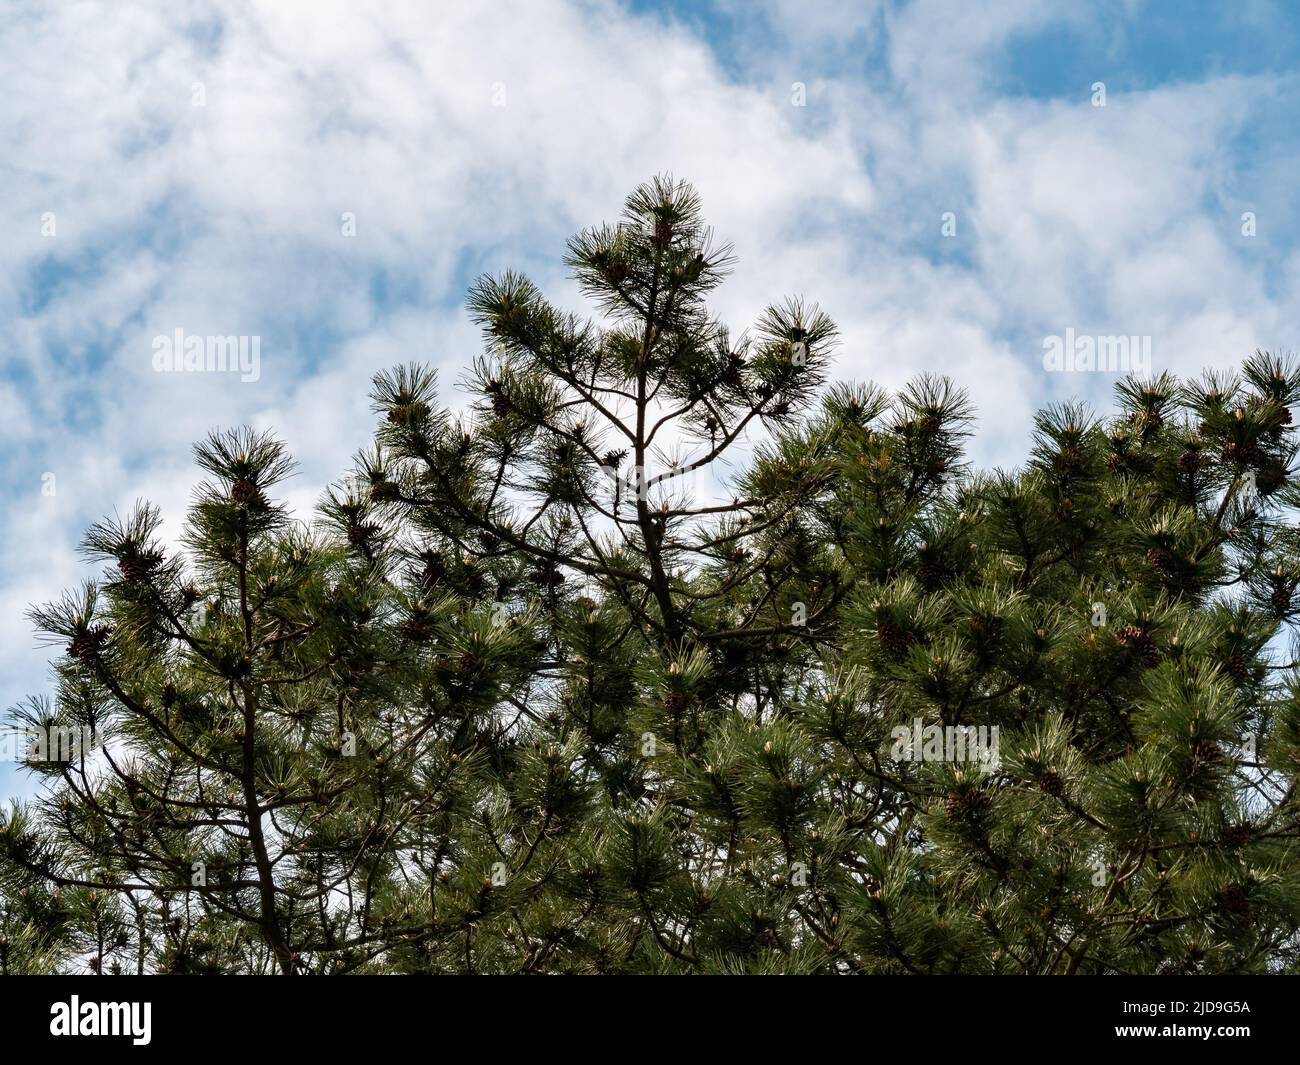 Pine tree branch in front of a blue sky with clouds. Thin needles and cones are on the twigs. Low angle view of an idyllic scene in the woodlands. Stock Photo